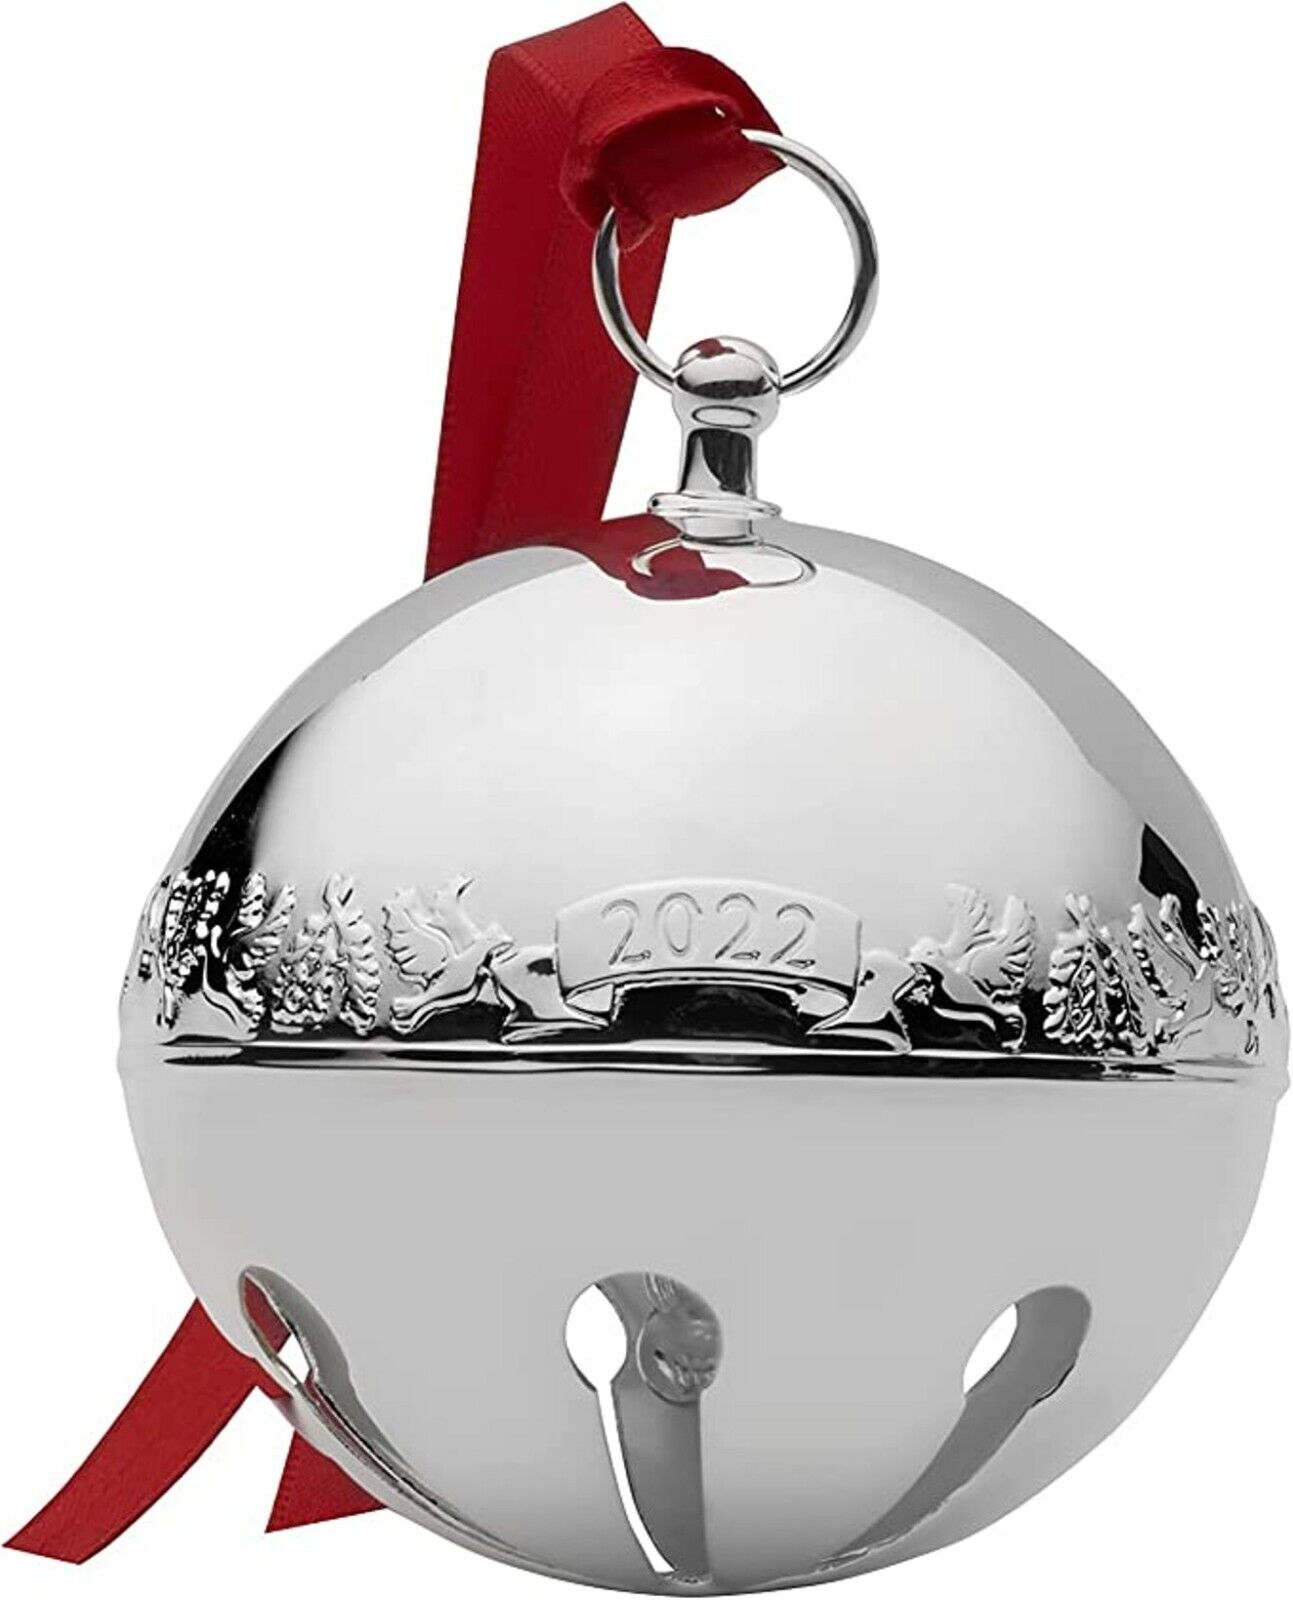 NEW 2022 Wallace 52nd Edition Silver Plate Sleigh Bell Xmas Ornament Decoration